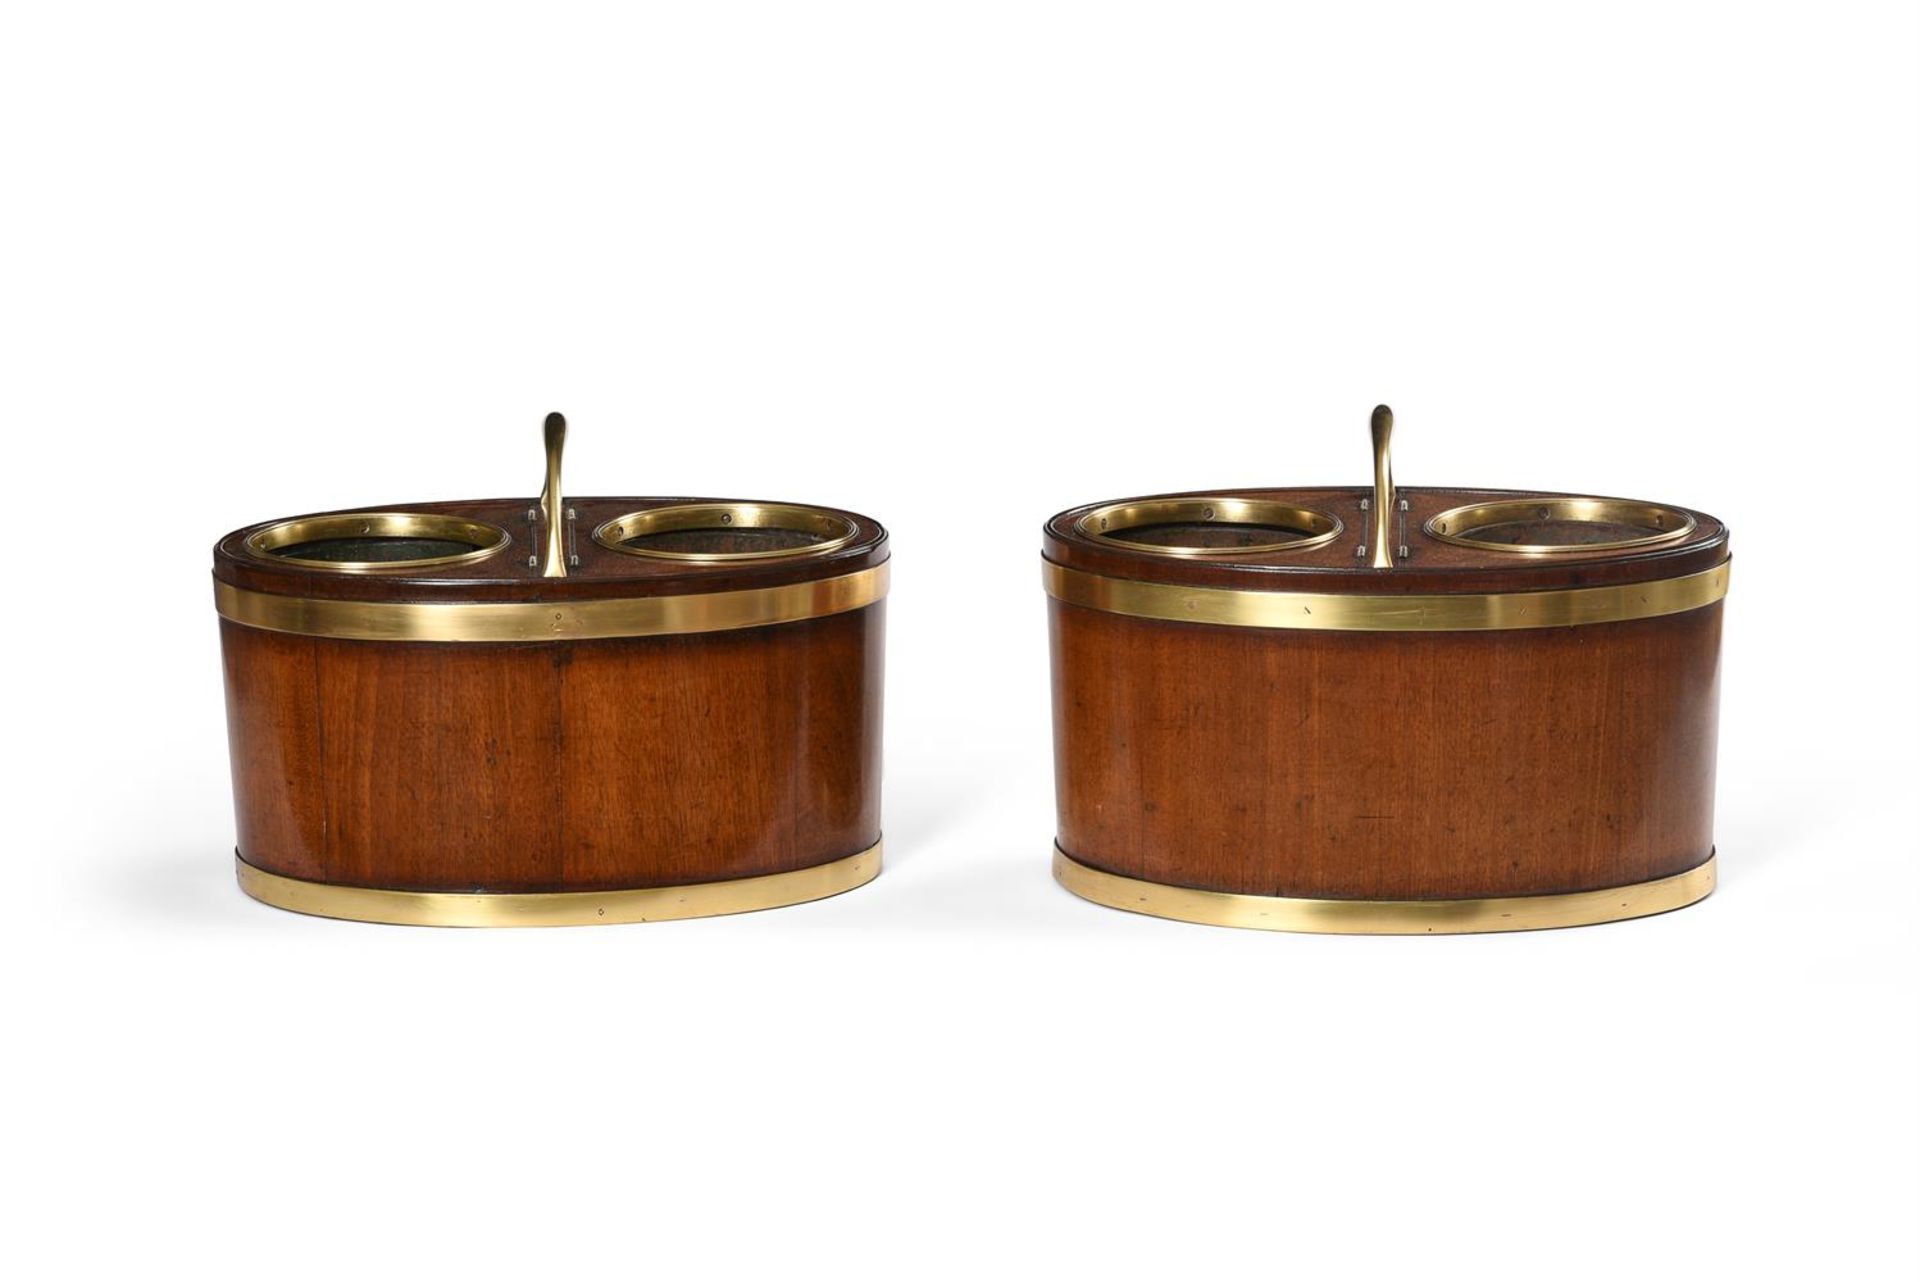 A RARE PAIR OF GEORGE III BRASS MOUNTED MAHOGANY TABLE TOP OVAL WINE COOLERS, CIRCA 1790 - Image 2 of 3